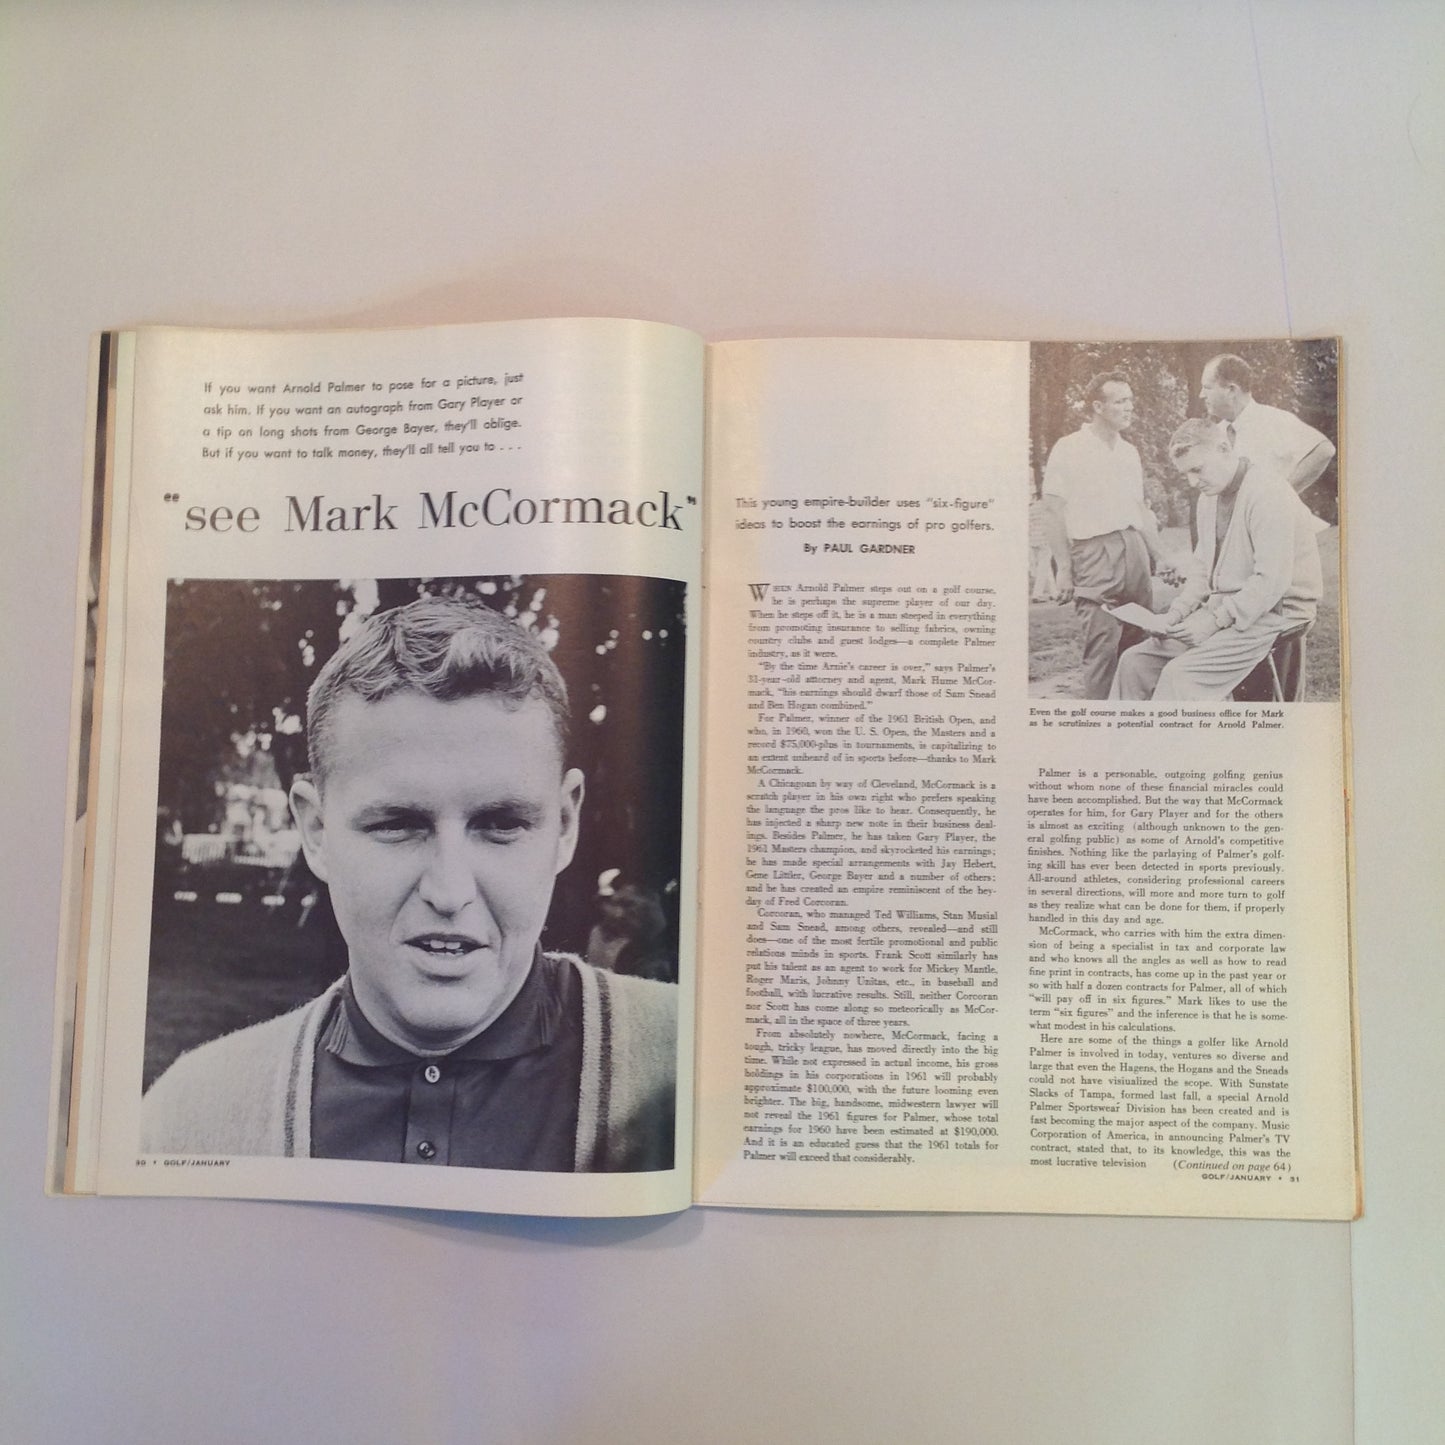 Vintage January 1962 GOLF Magazine Duel of the Decade: Hogan Vs. Snead Plus Christmas Gifts for Golfers